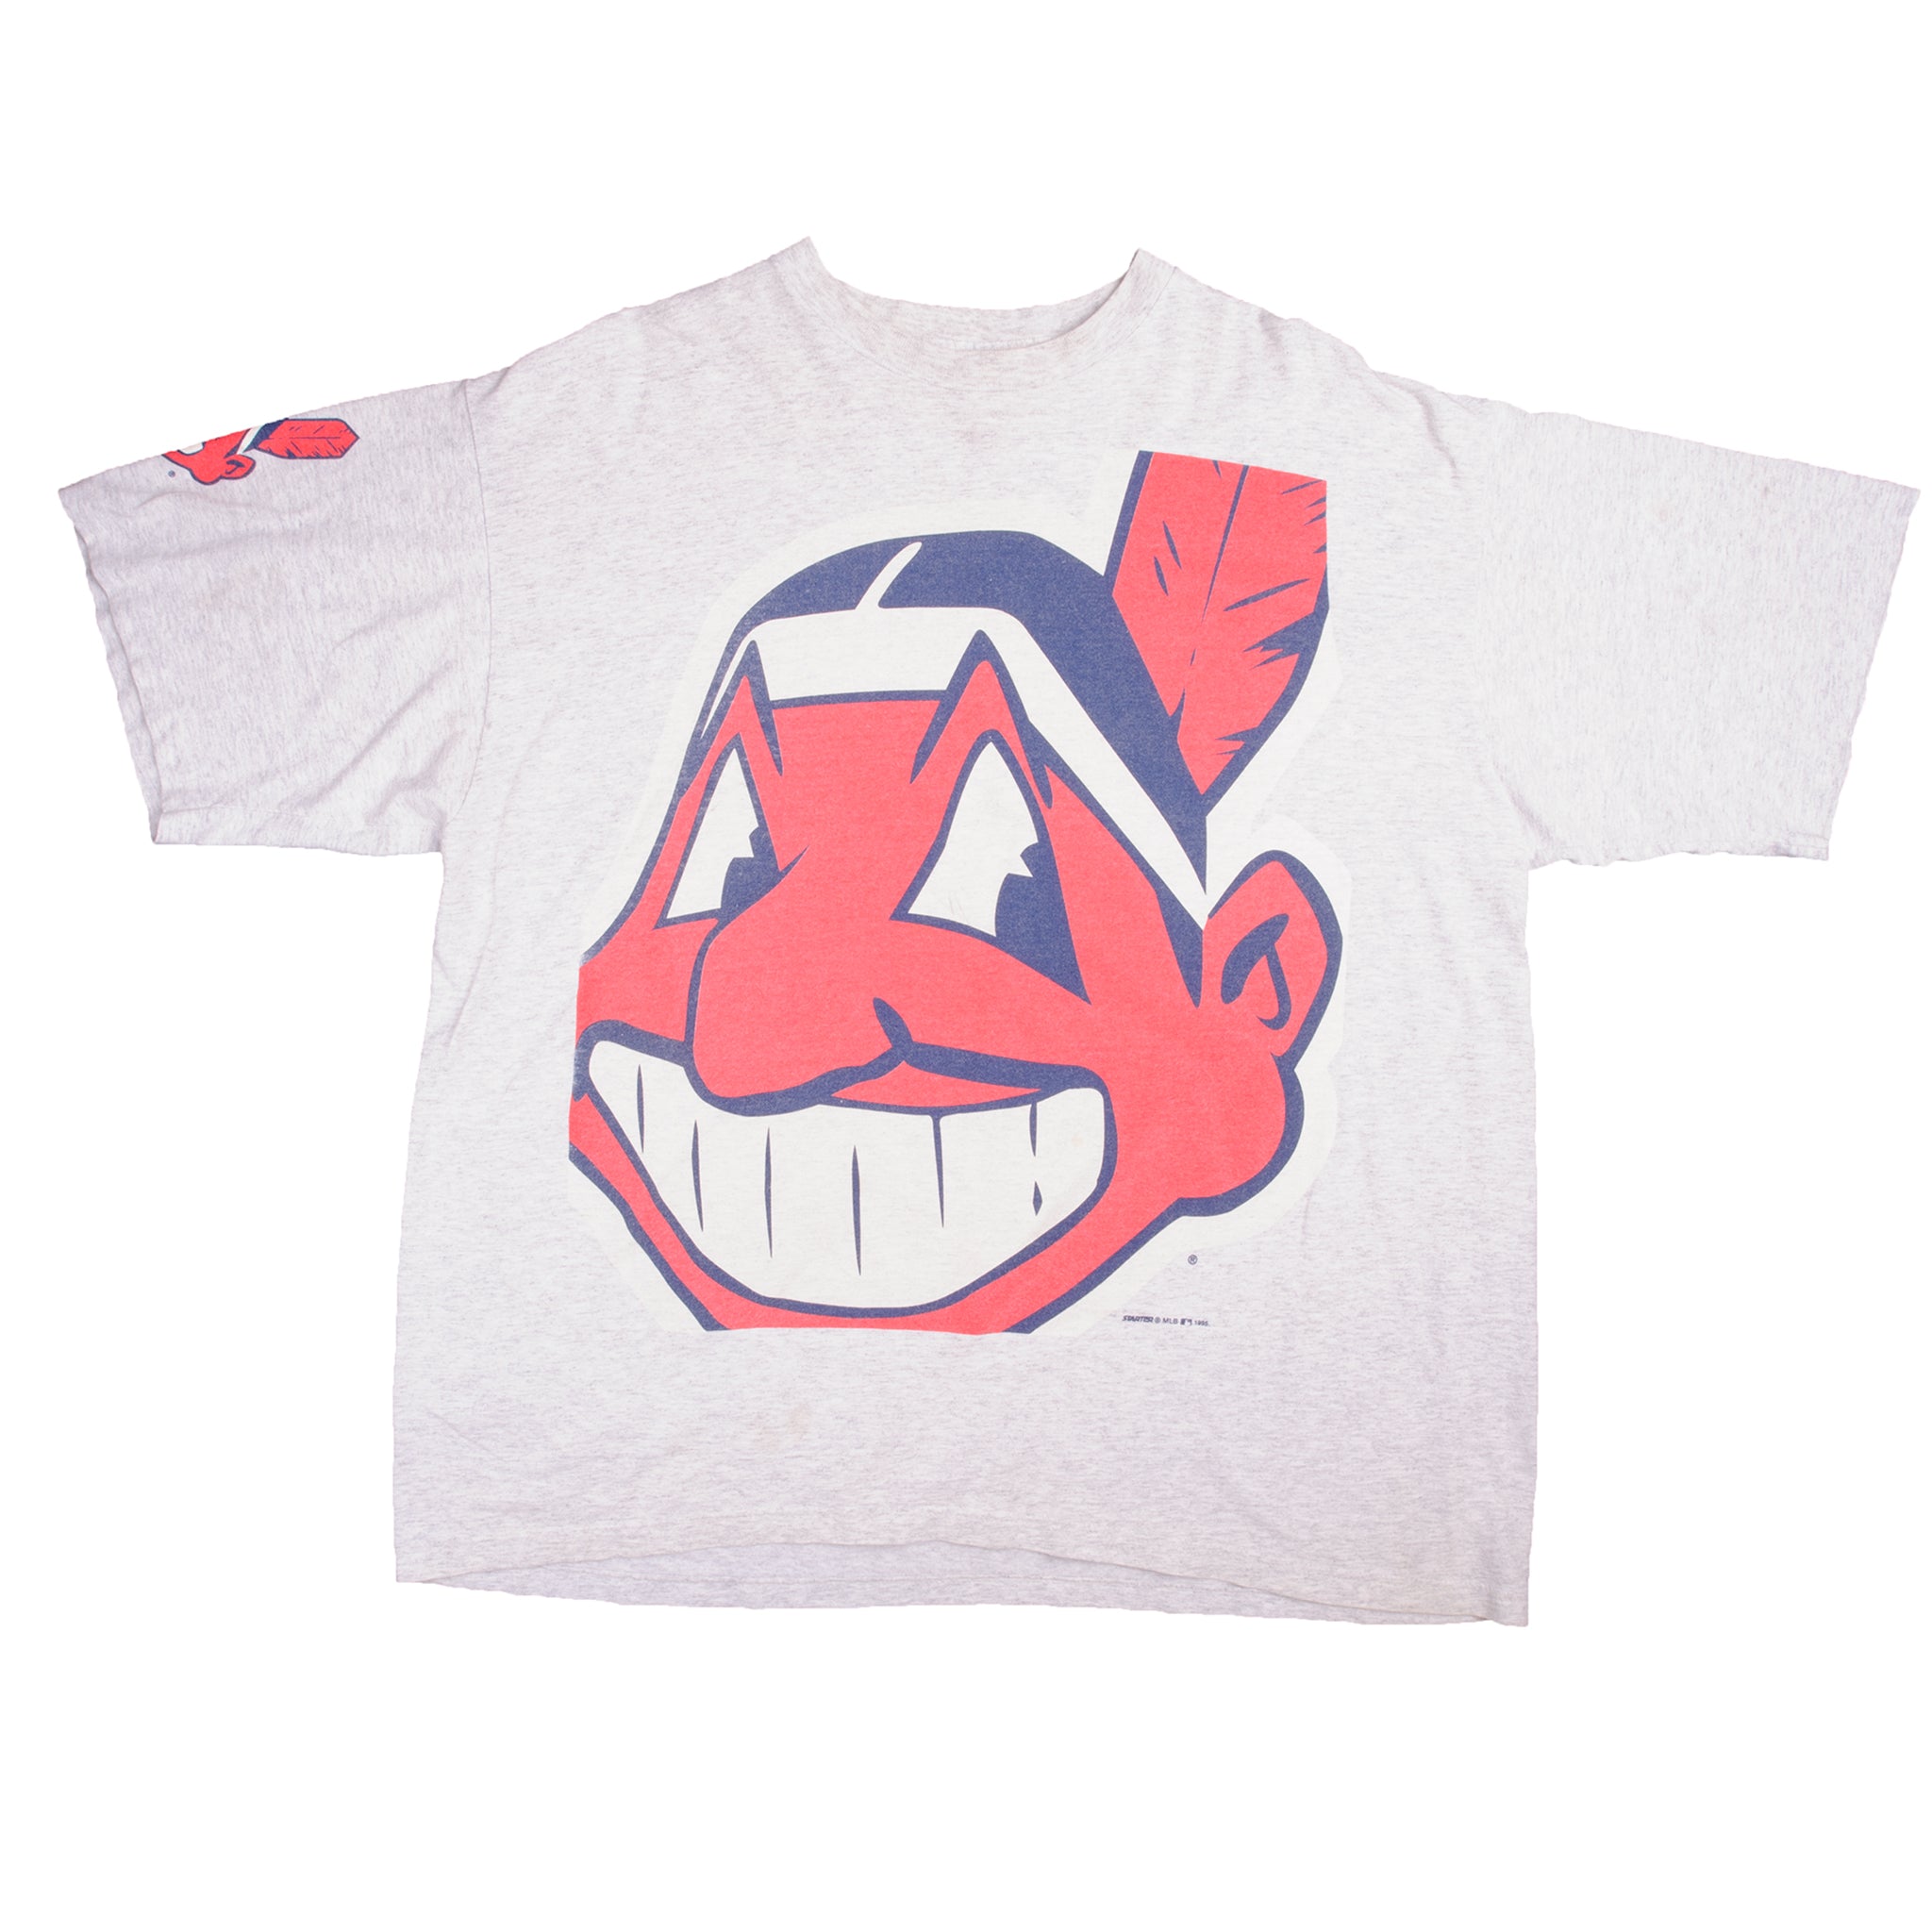 VINTAGE MLB CLEVELAND INDIANS WITH CHIEF WAHOO TEE SHIRT 1995 SIZE 2XL –  Vintage rare usa